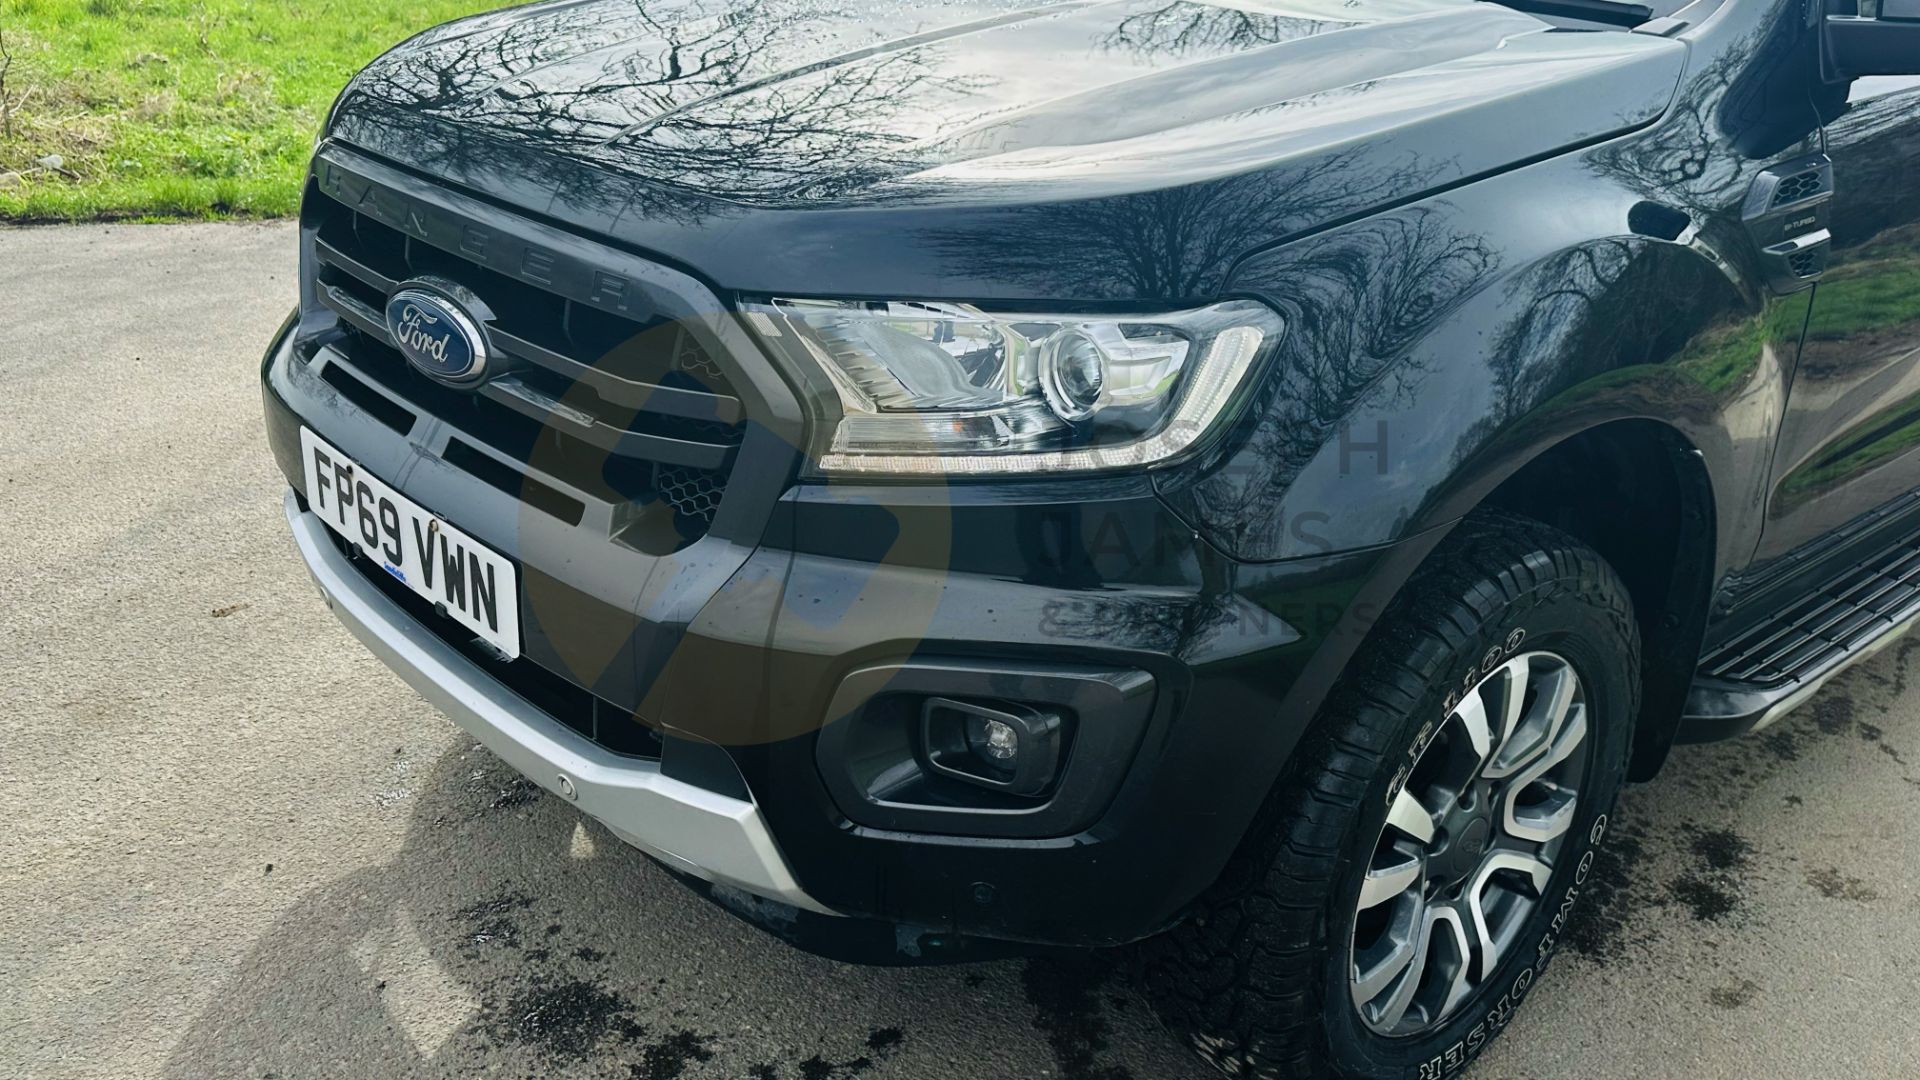 FORD RANGER *WILDTRAK* DOUBLE CAB PICK-UP (2020 - FACELIFT MODEL) 2.0 TDCI 'ECOBLUE' - 10 SPEED AUTO - Image 16 of 45